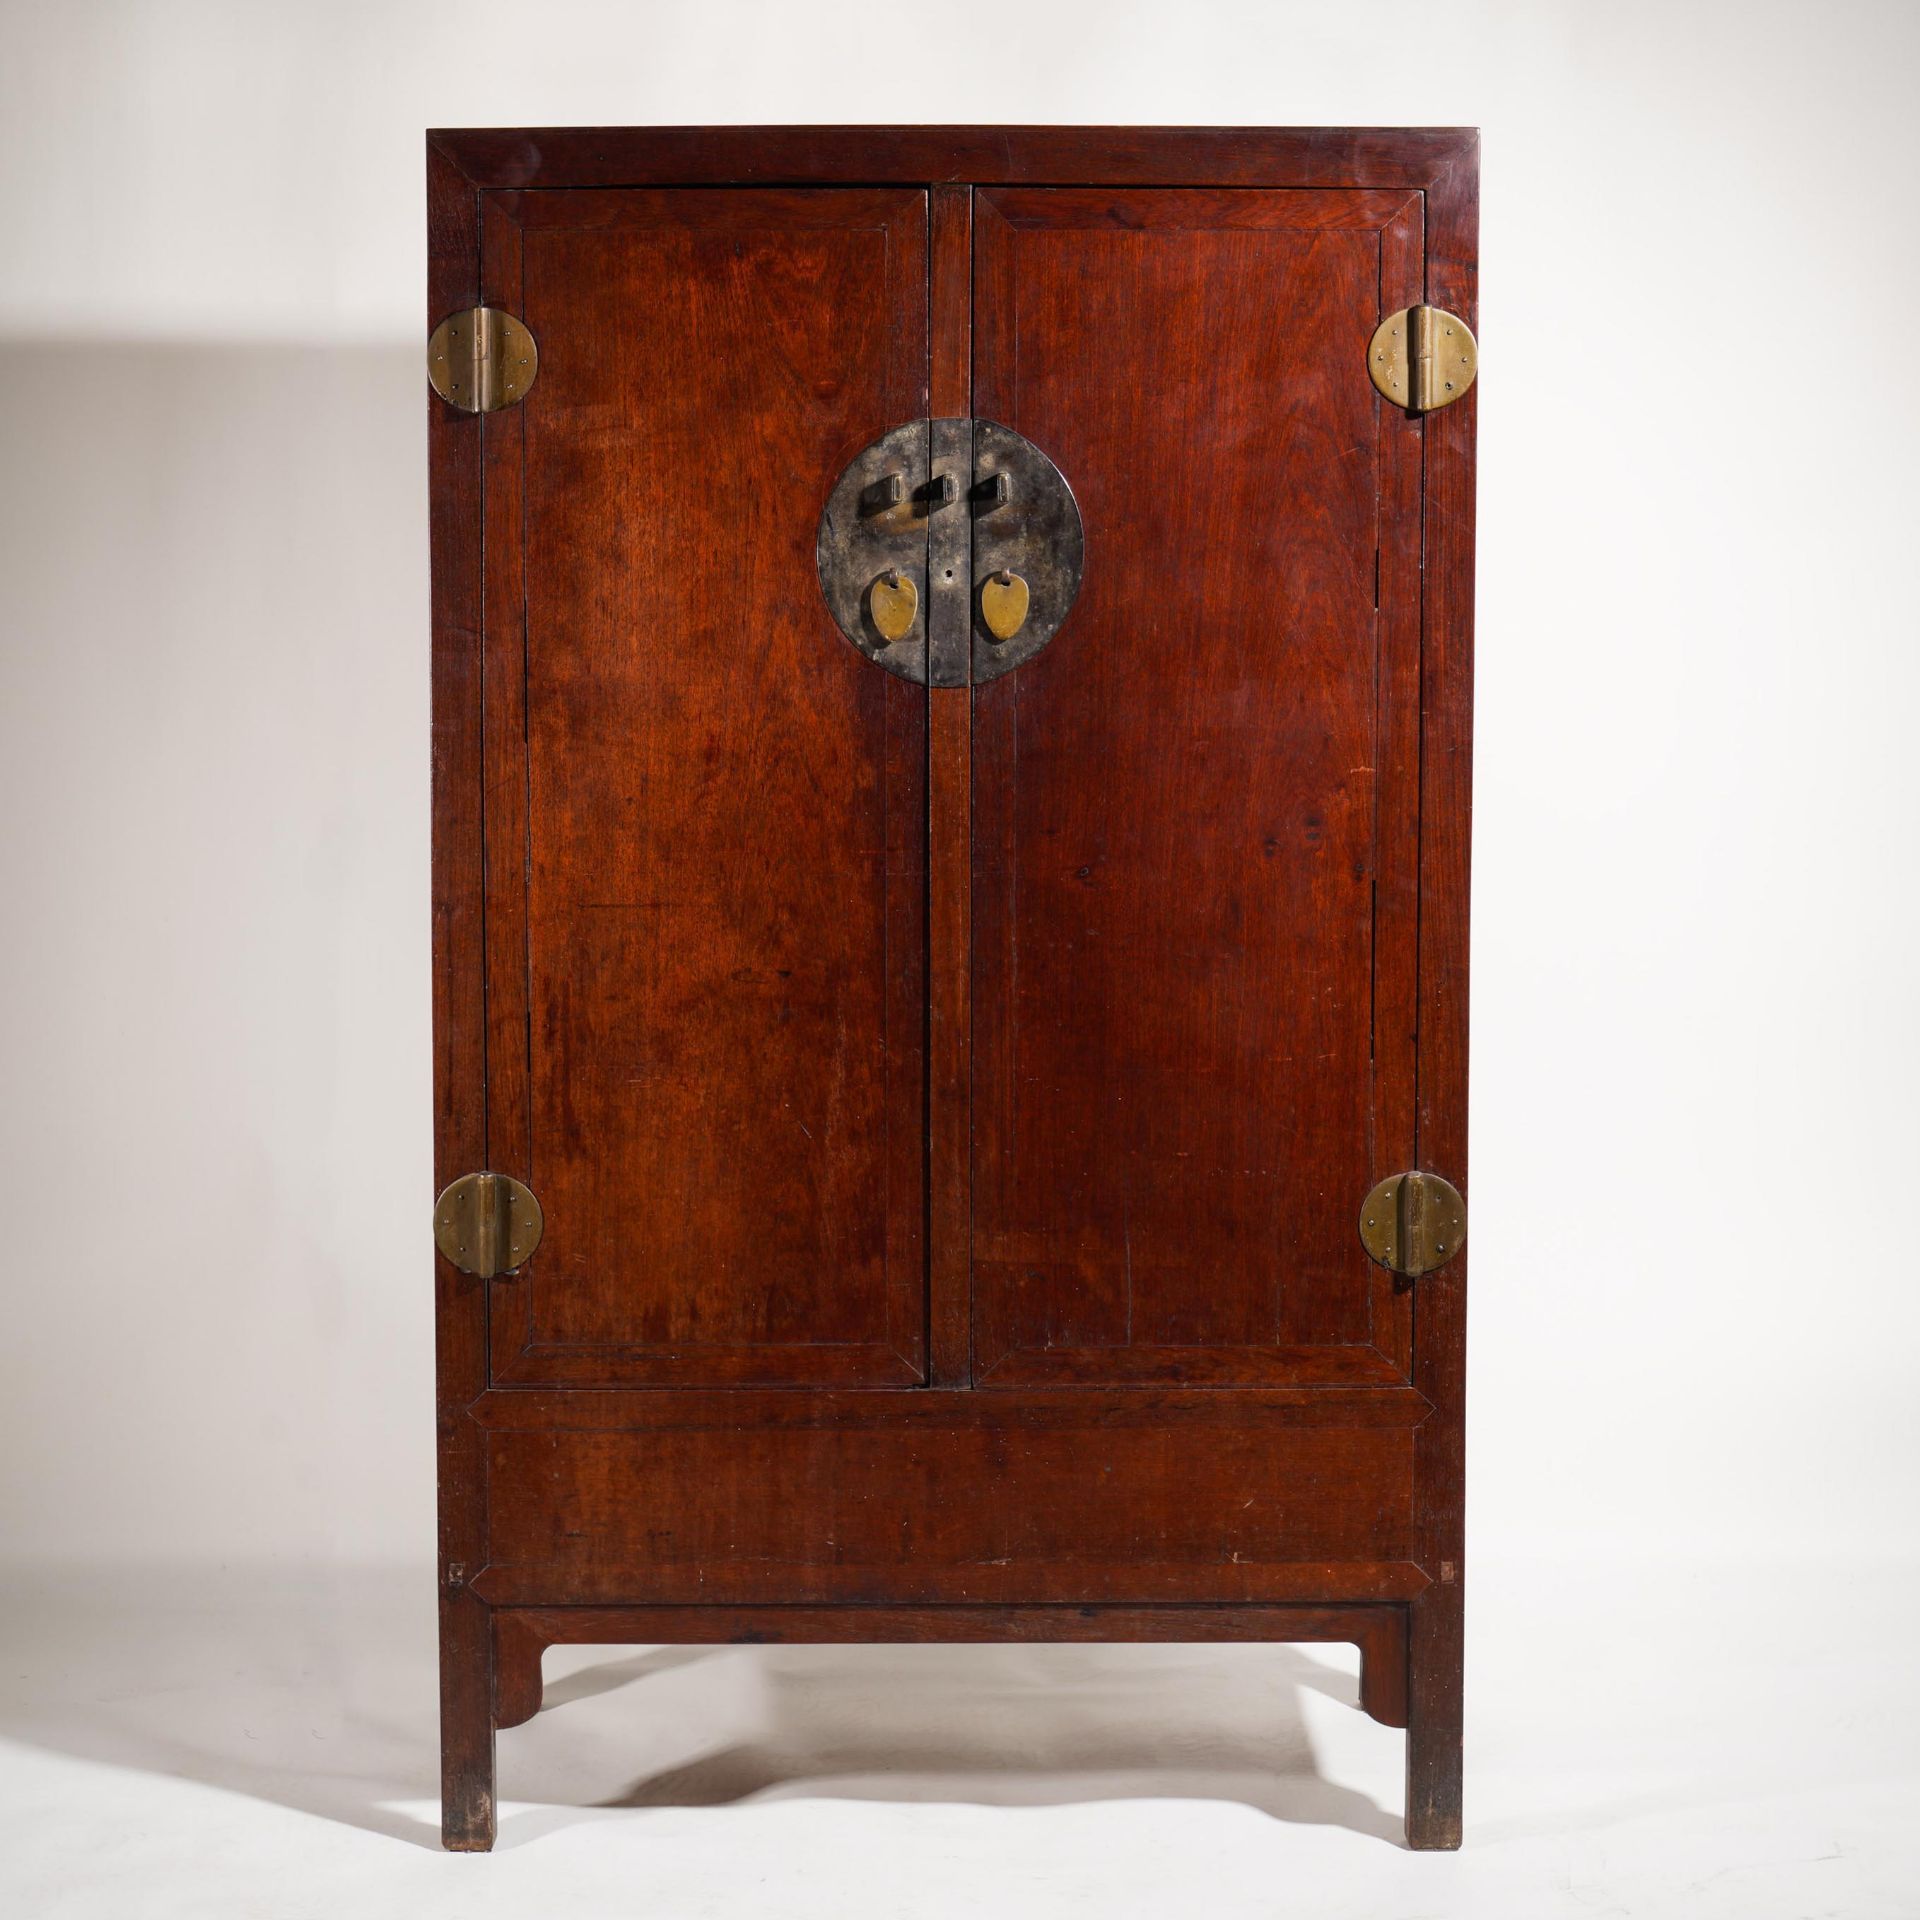 Huanghua pear square corner cabinet  from  the Qing  dynasty